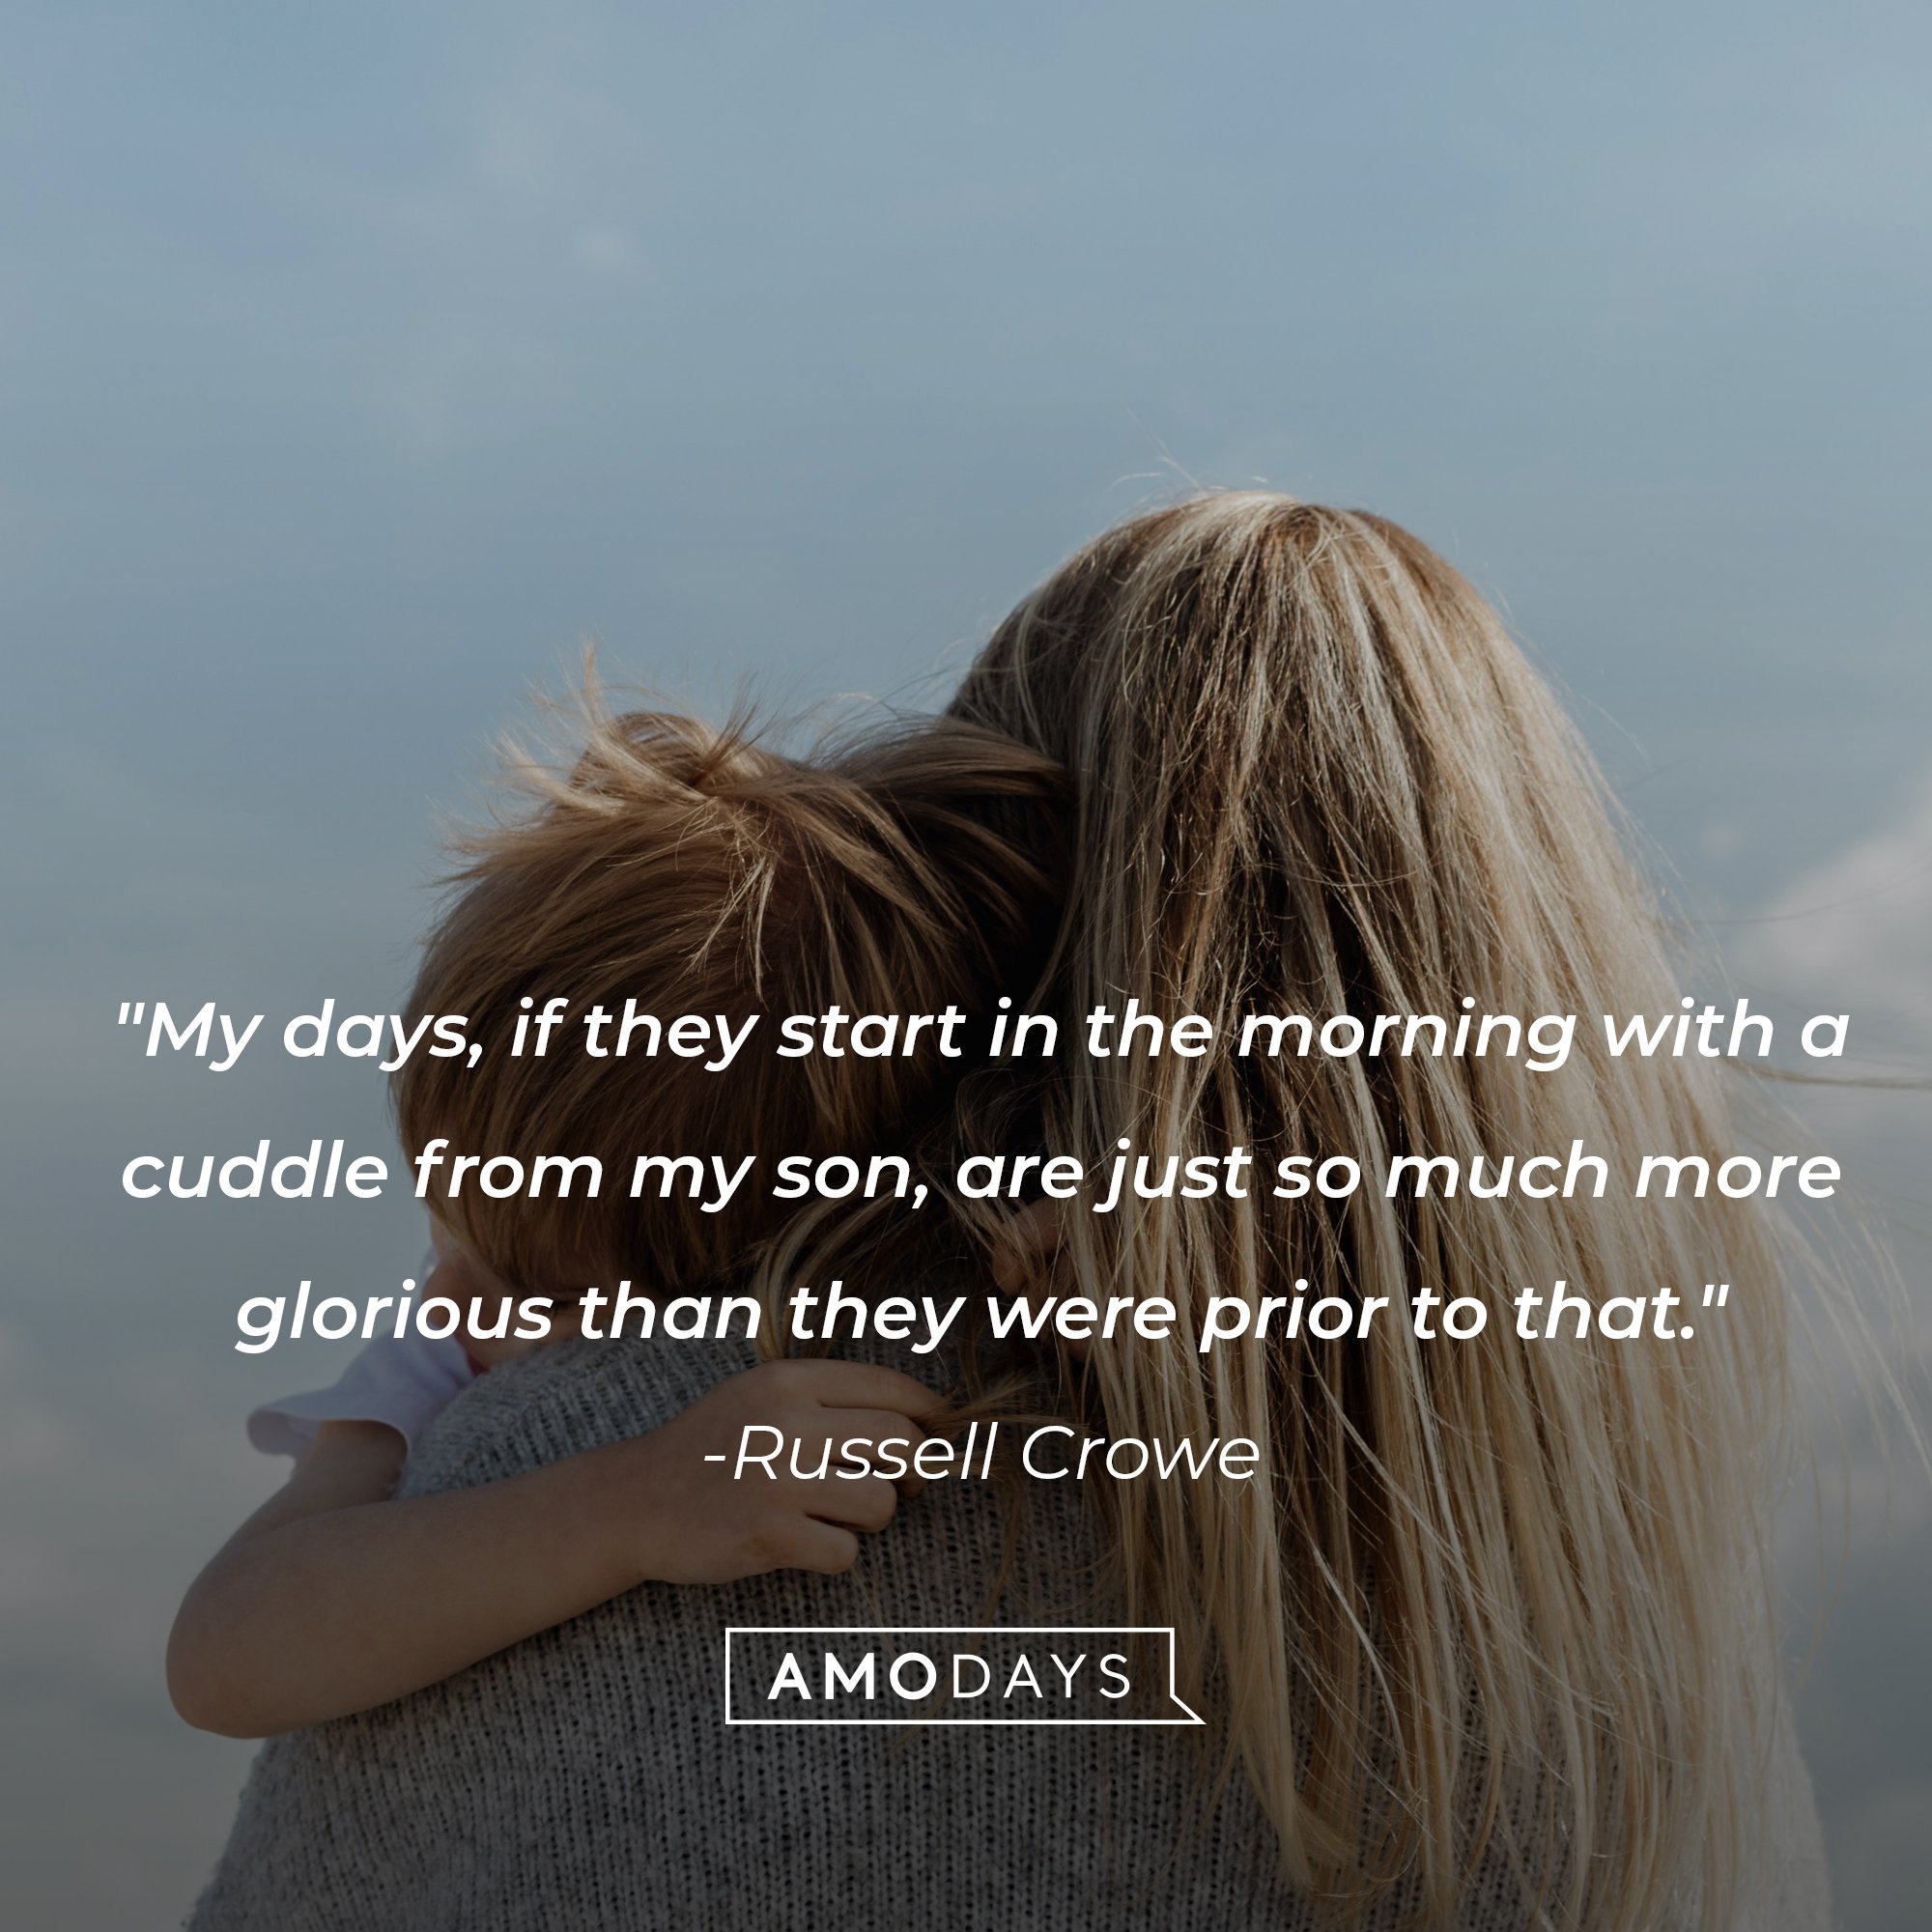 Russell Crowe's quote: "My days, if they start in the morning with a cuddle from my son, are just so much more glorious than they were prior to that." | Image: AmoDays